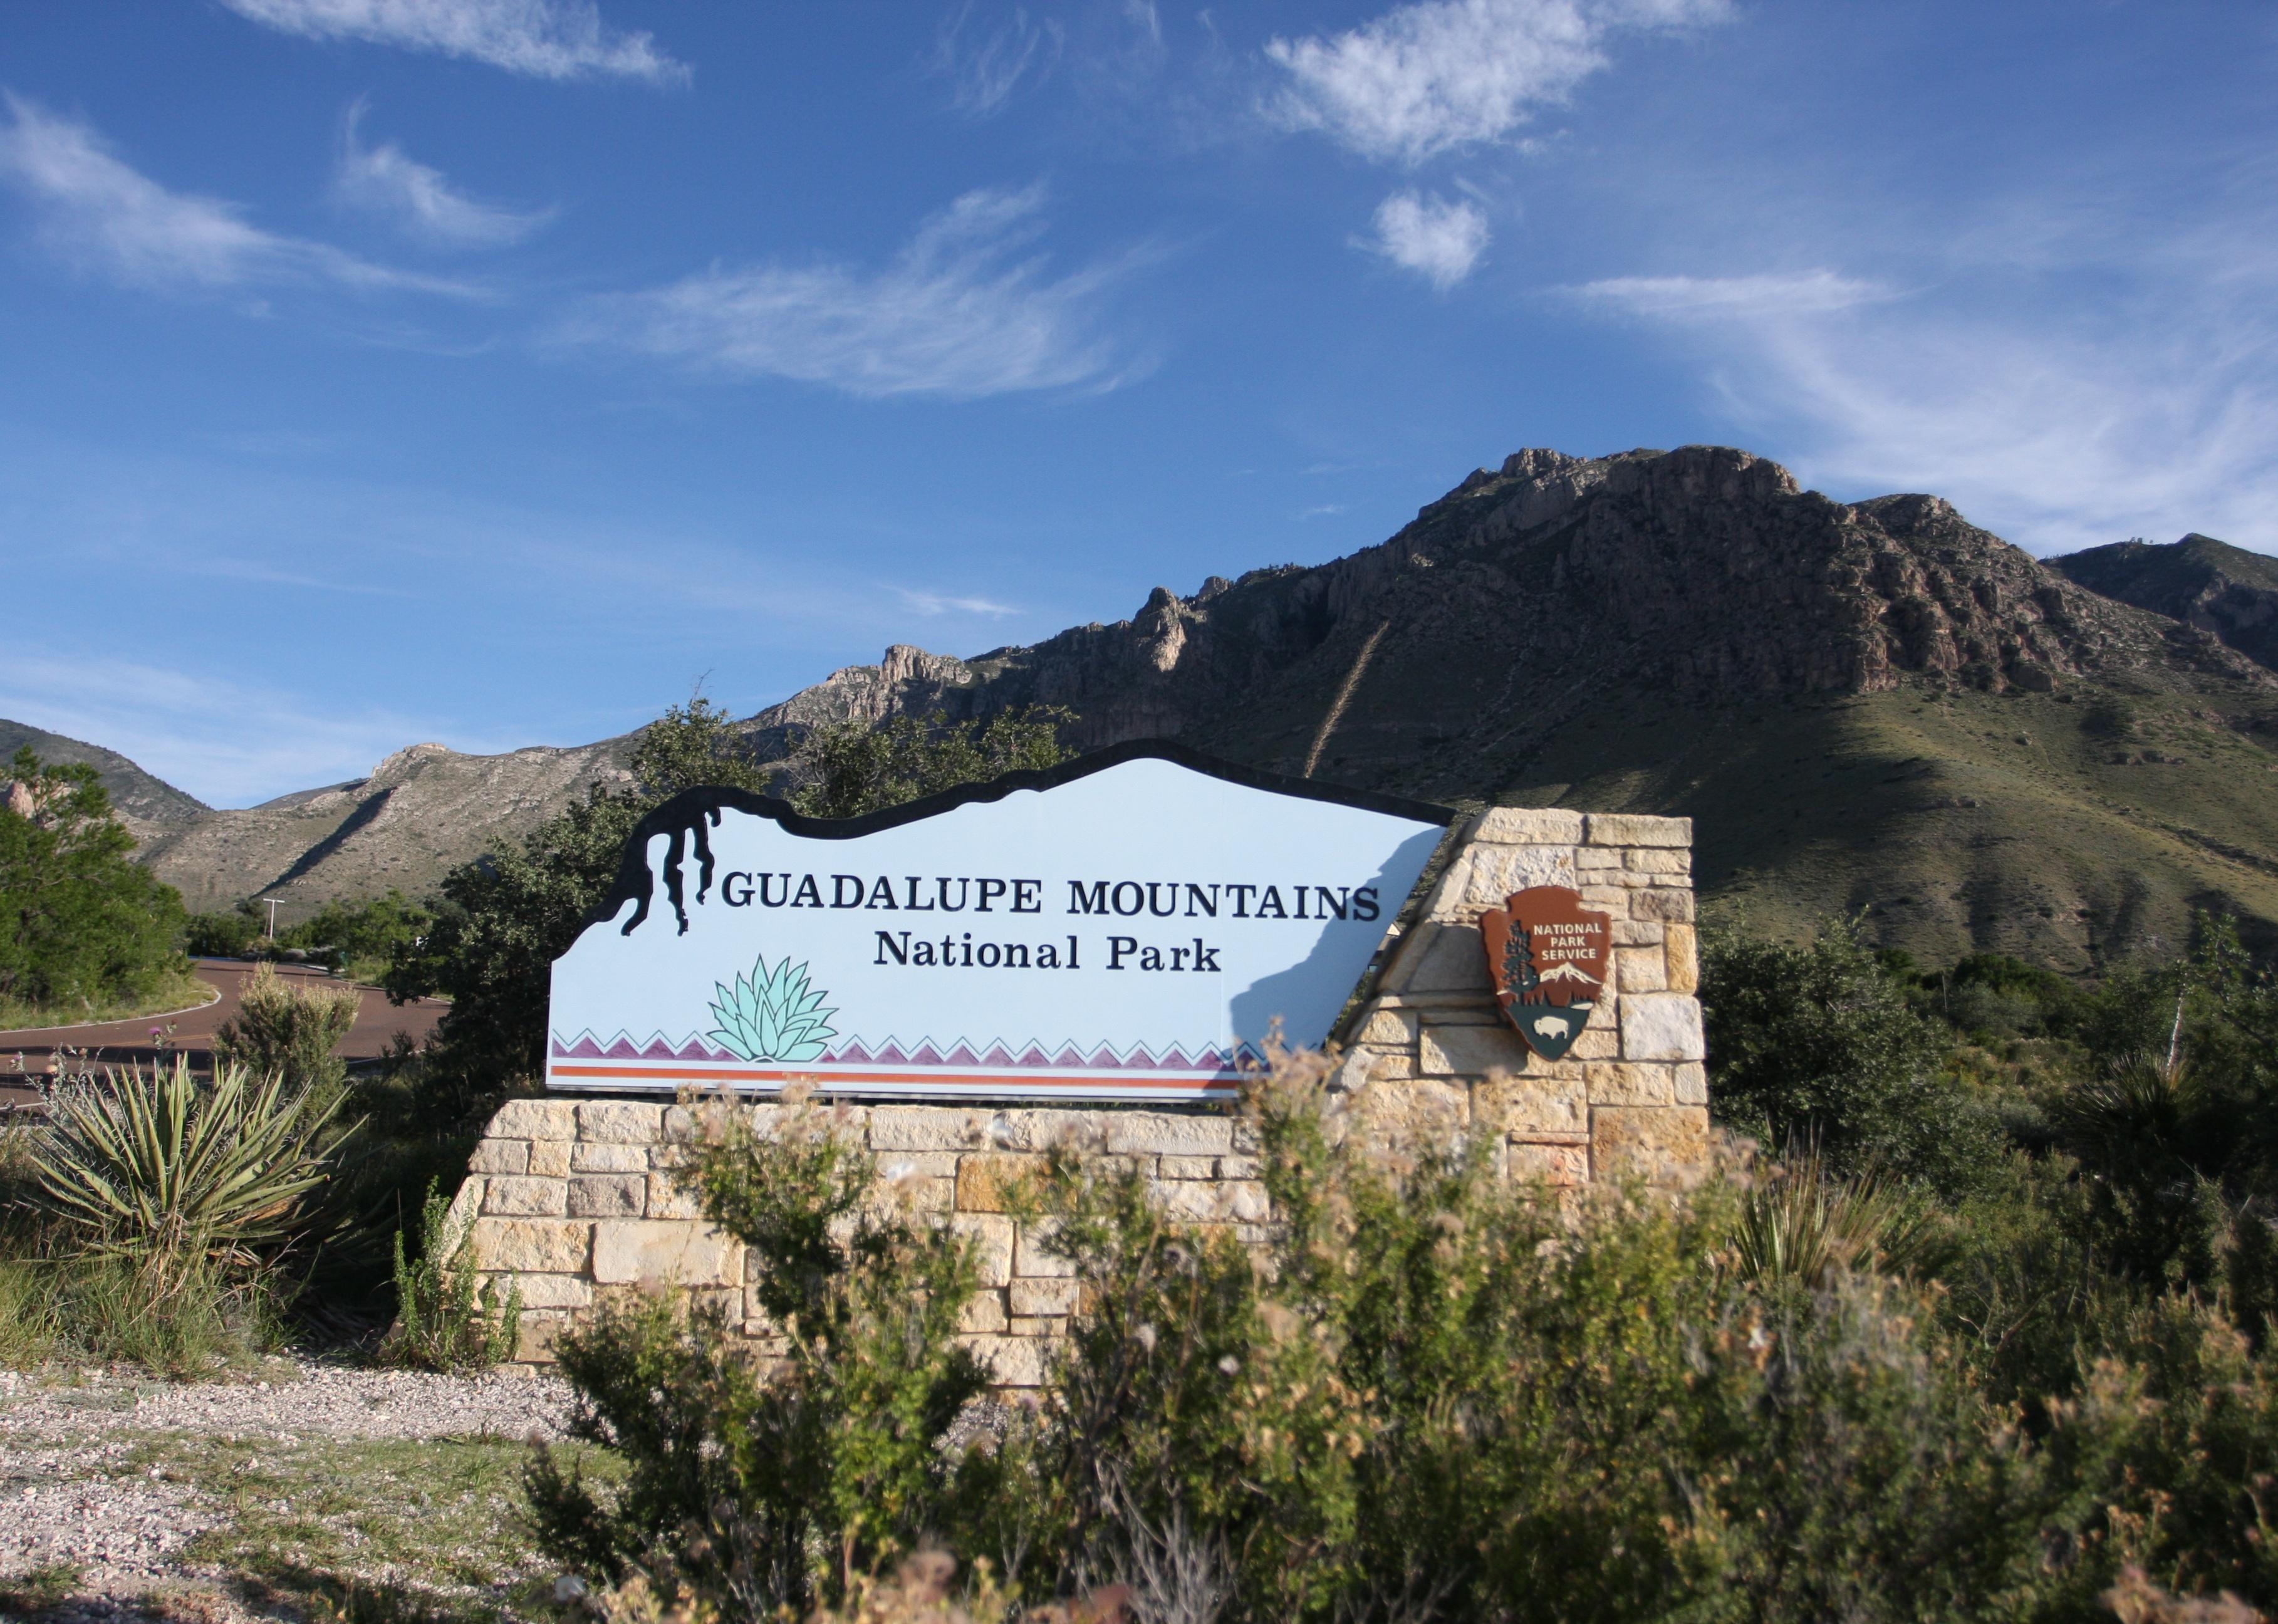 Guadalupe Mountains National Park sign.